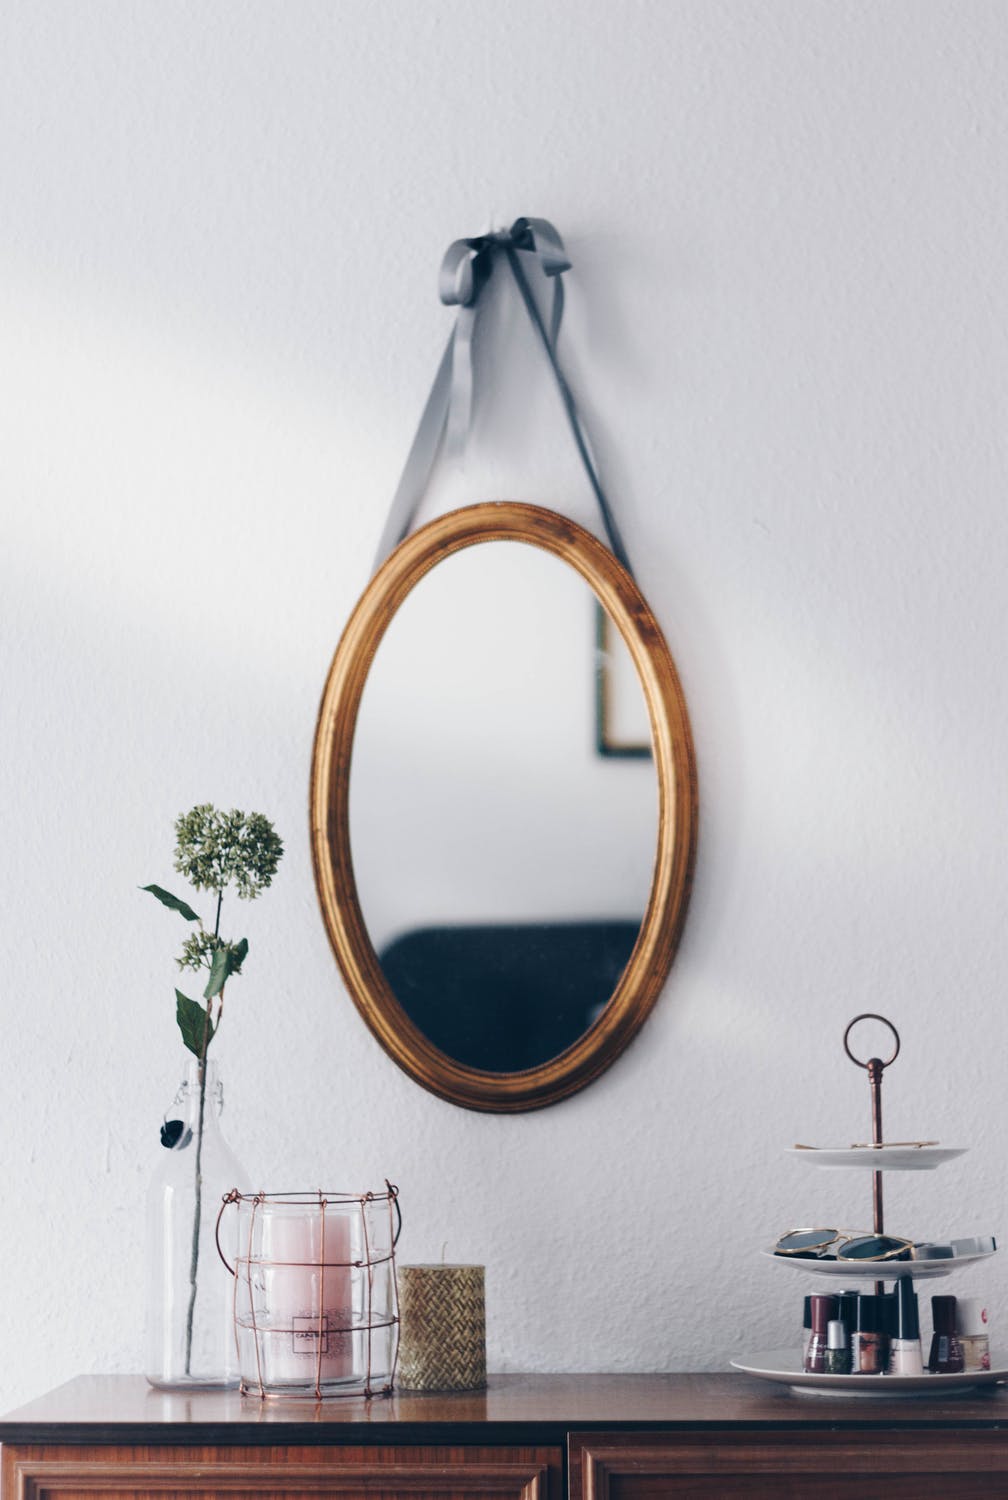 Top tips for packing mirrors for relocation